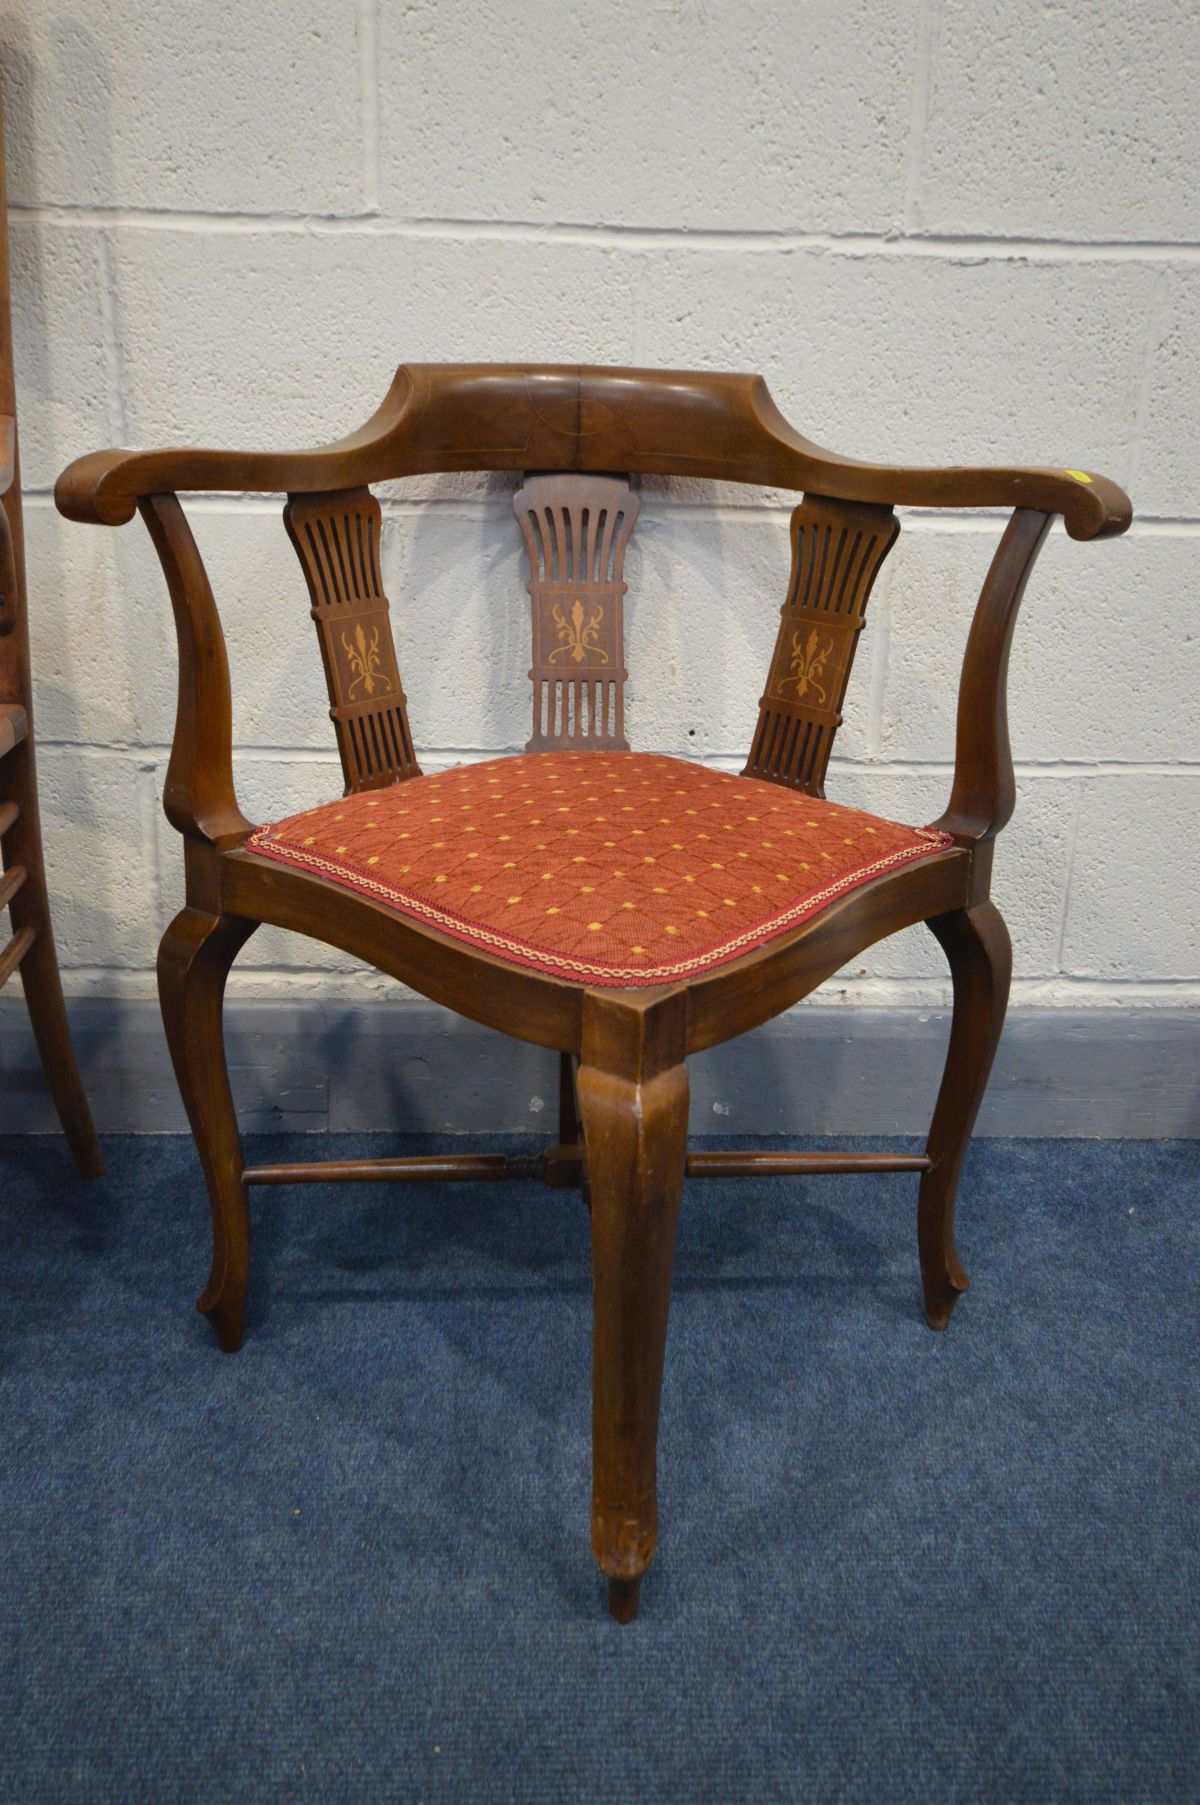 AN EDWARDIAN MAHOGANY AND INLAID CORNER CHAIR along with a beech spindle back chair (2) - Image 2 of 3